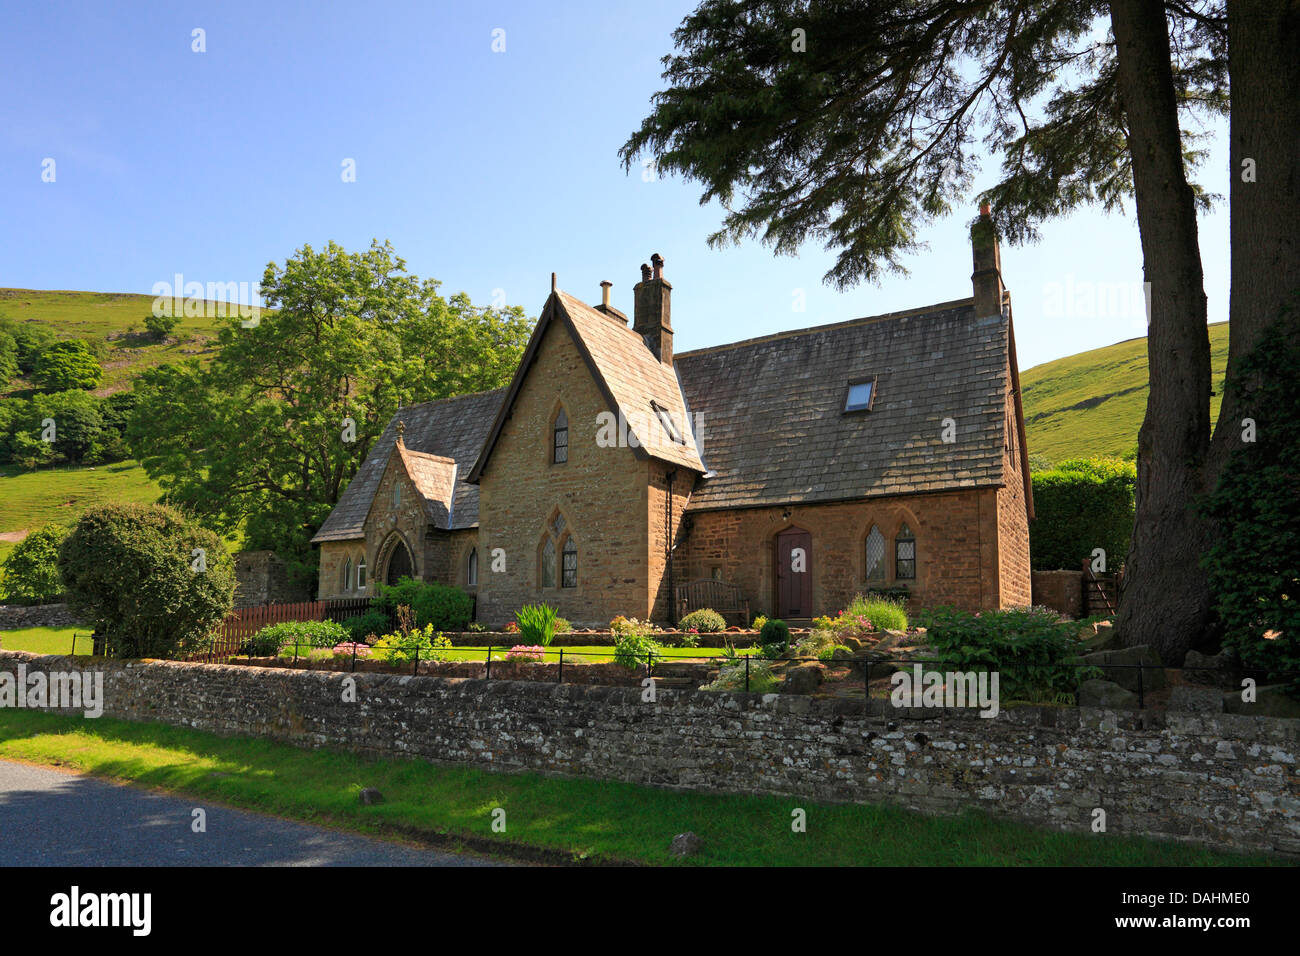 Buckden Old School House, Wharfedale, North Yorkshire, Yorkshire Dales National Park, England, UK. Stock Photo